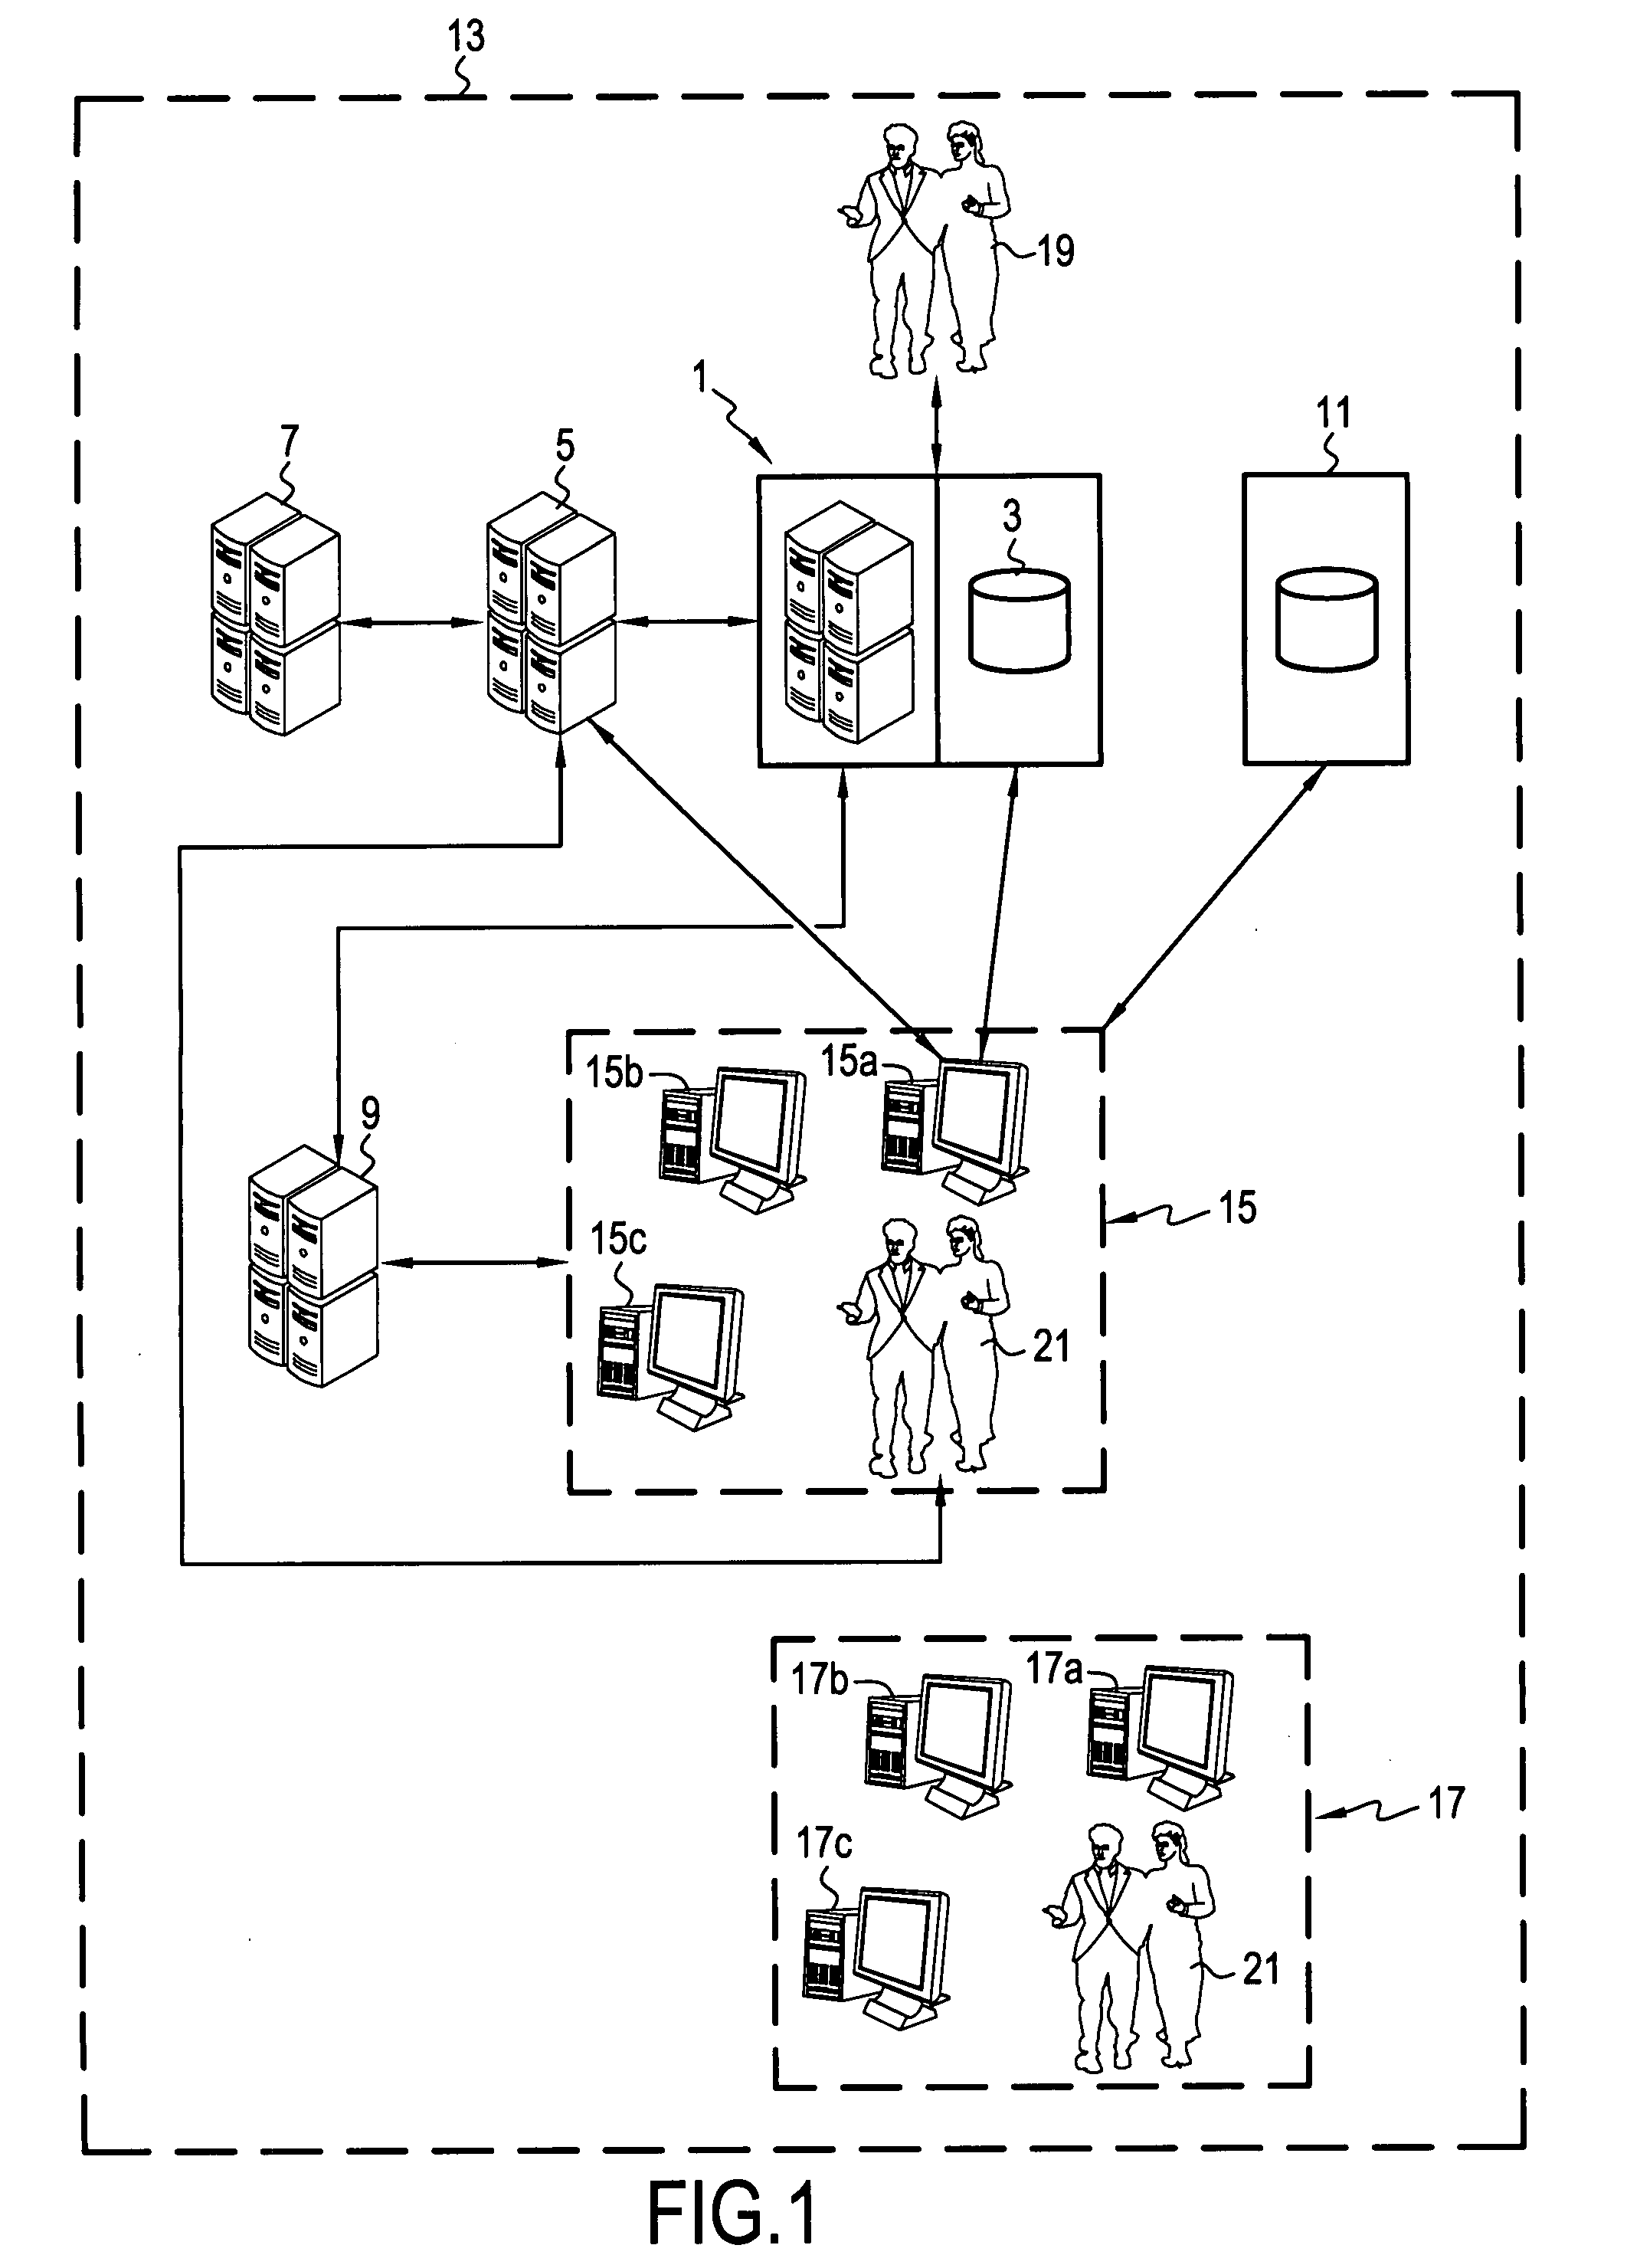 System and Method For Migrating a Platform, User Data, and Applications From at Least One Server to at Least One Computer